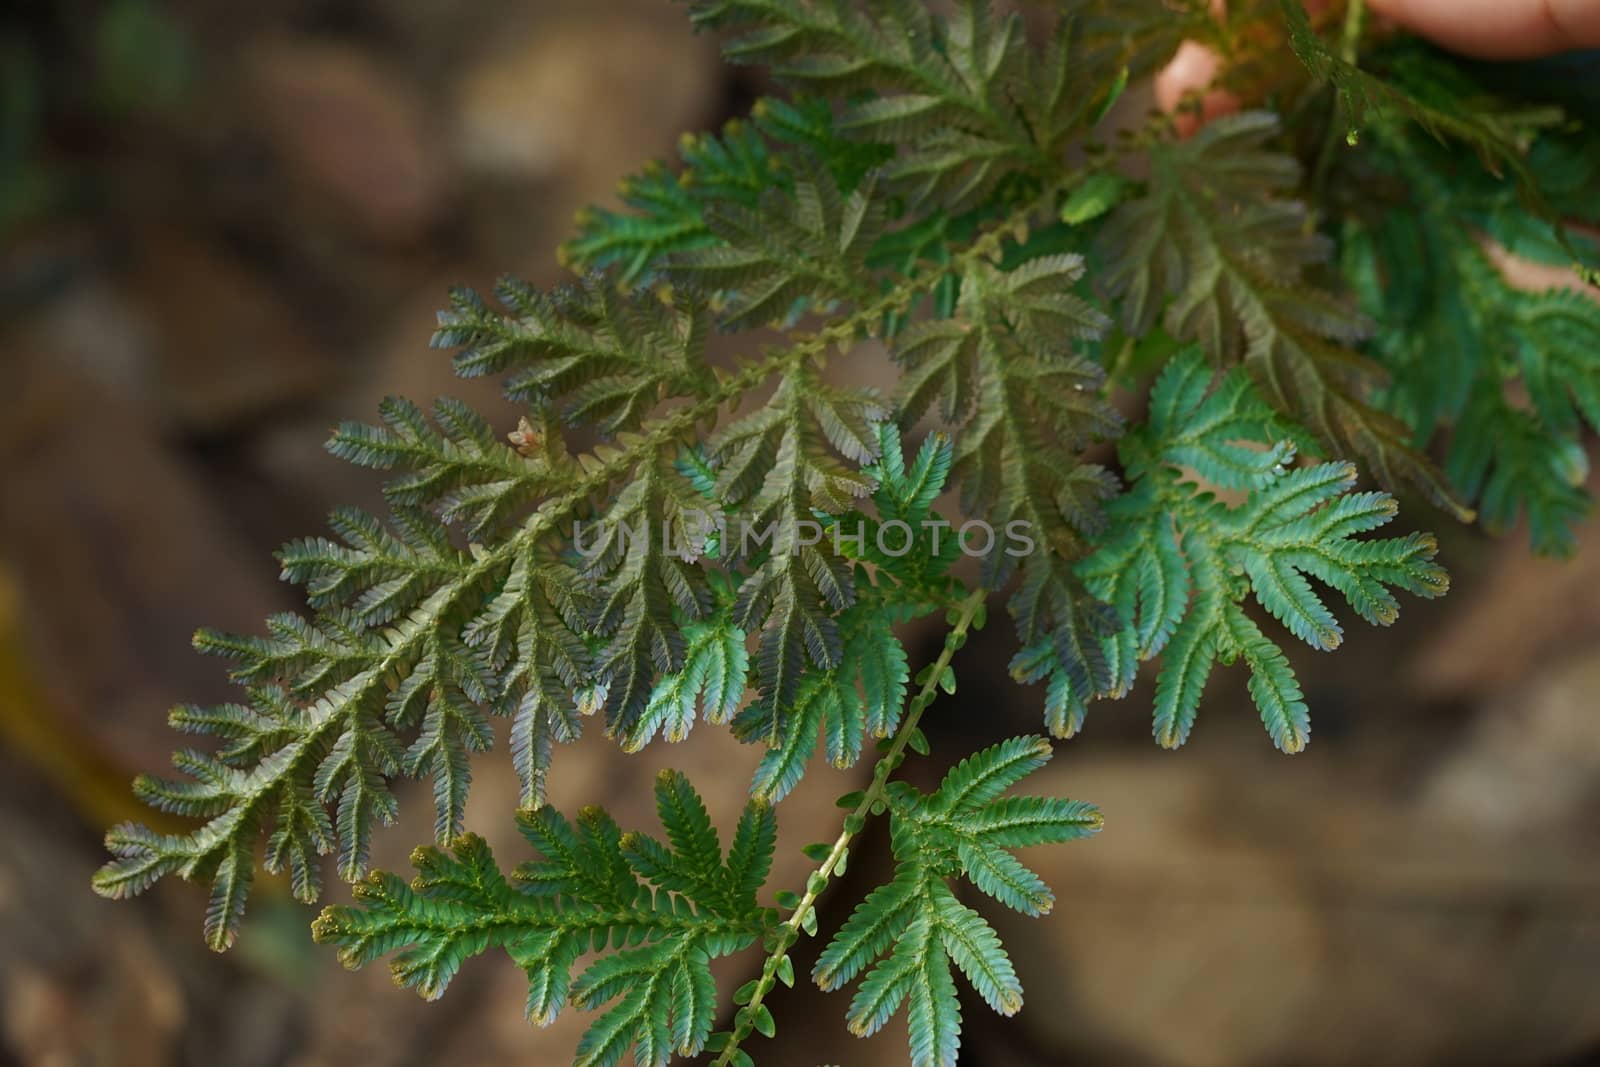 Blue and Gold fern close up found only in abundant forests. Natural beauty is rare.